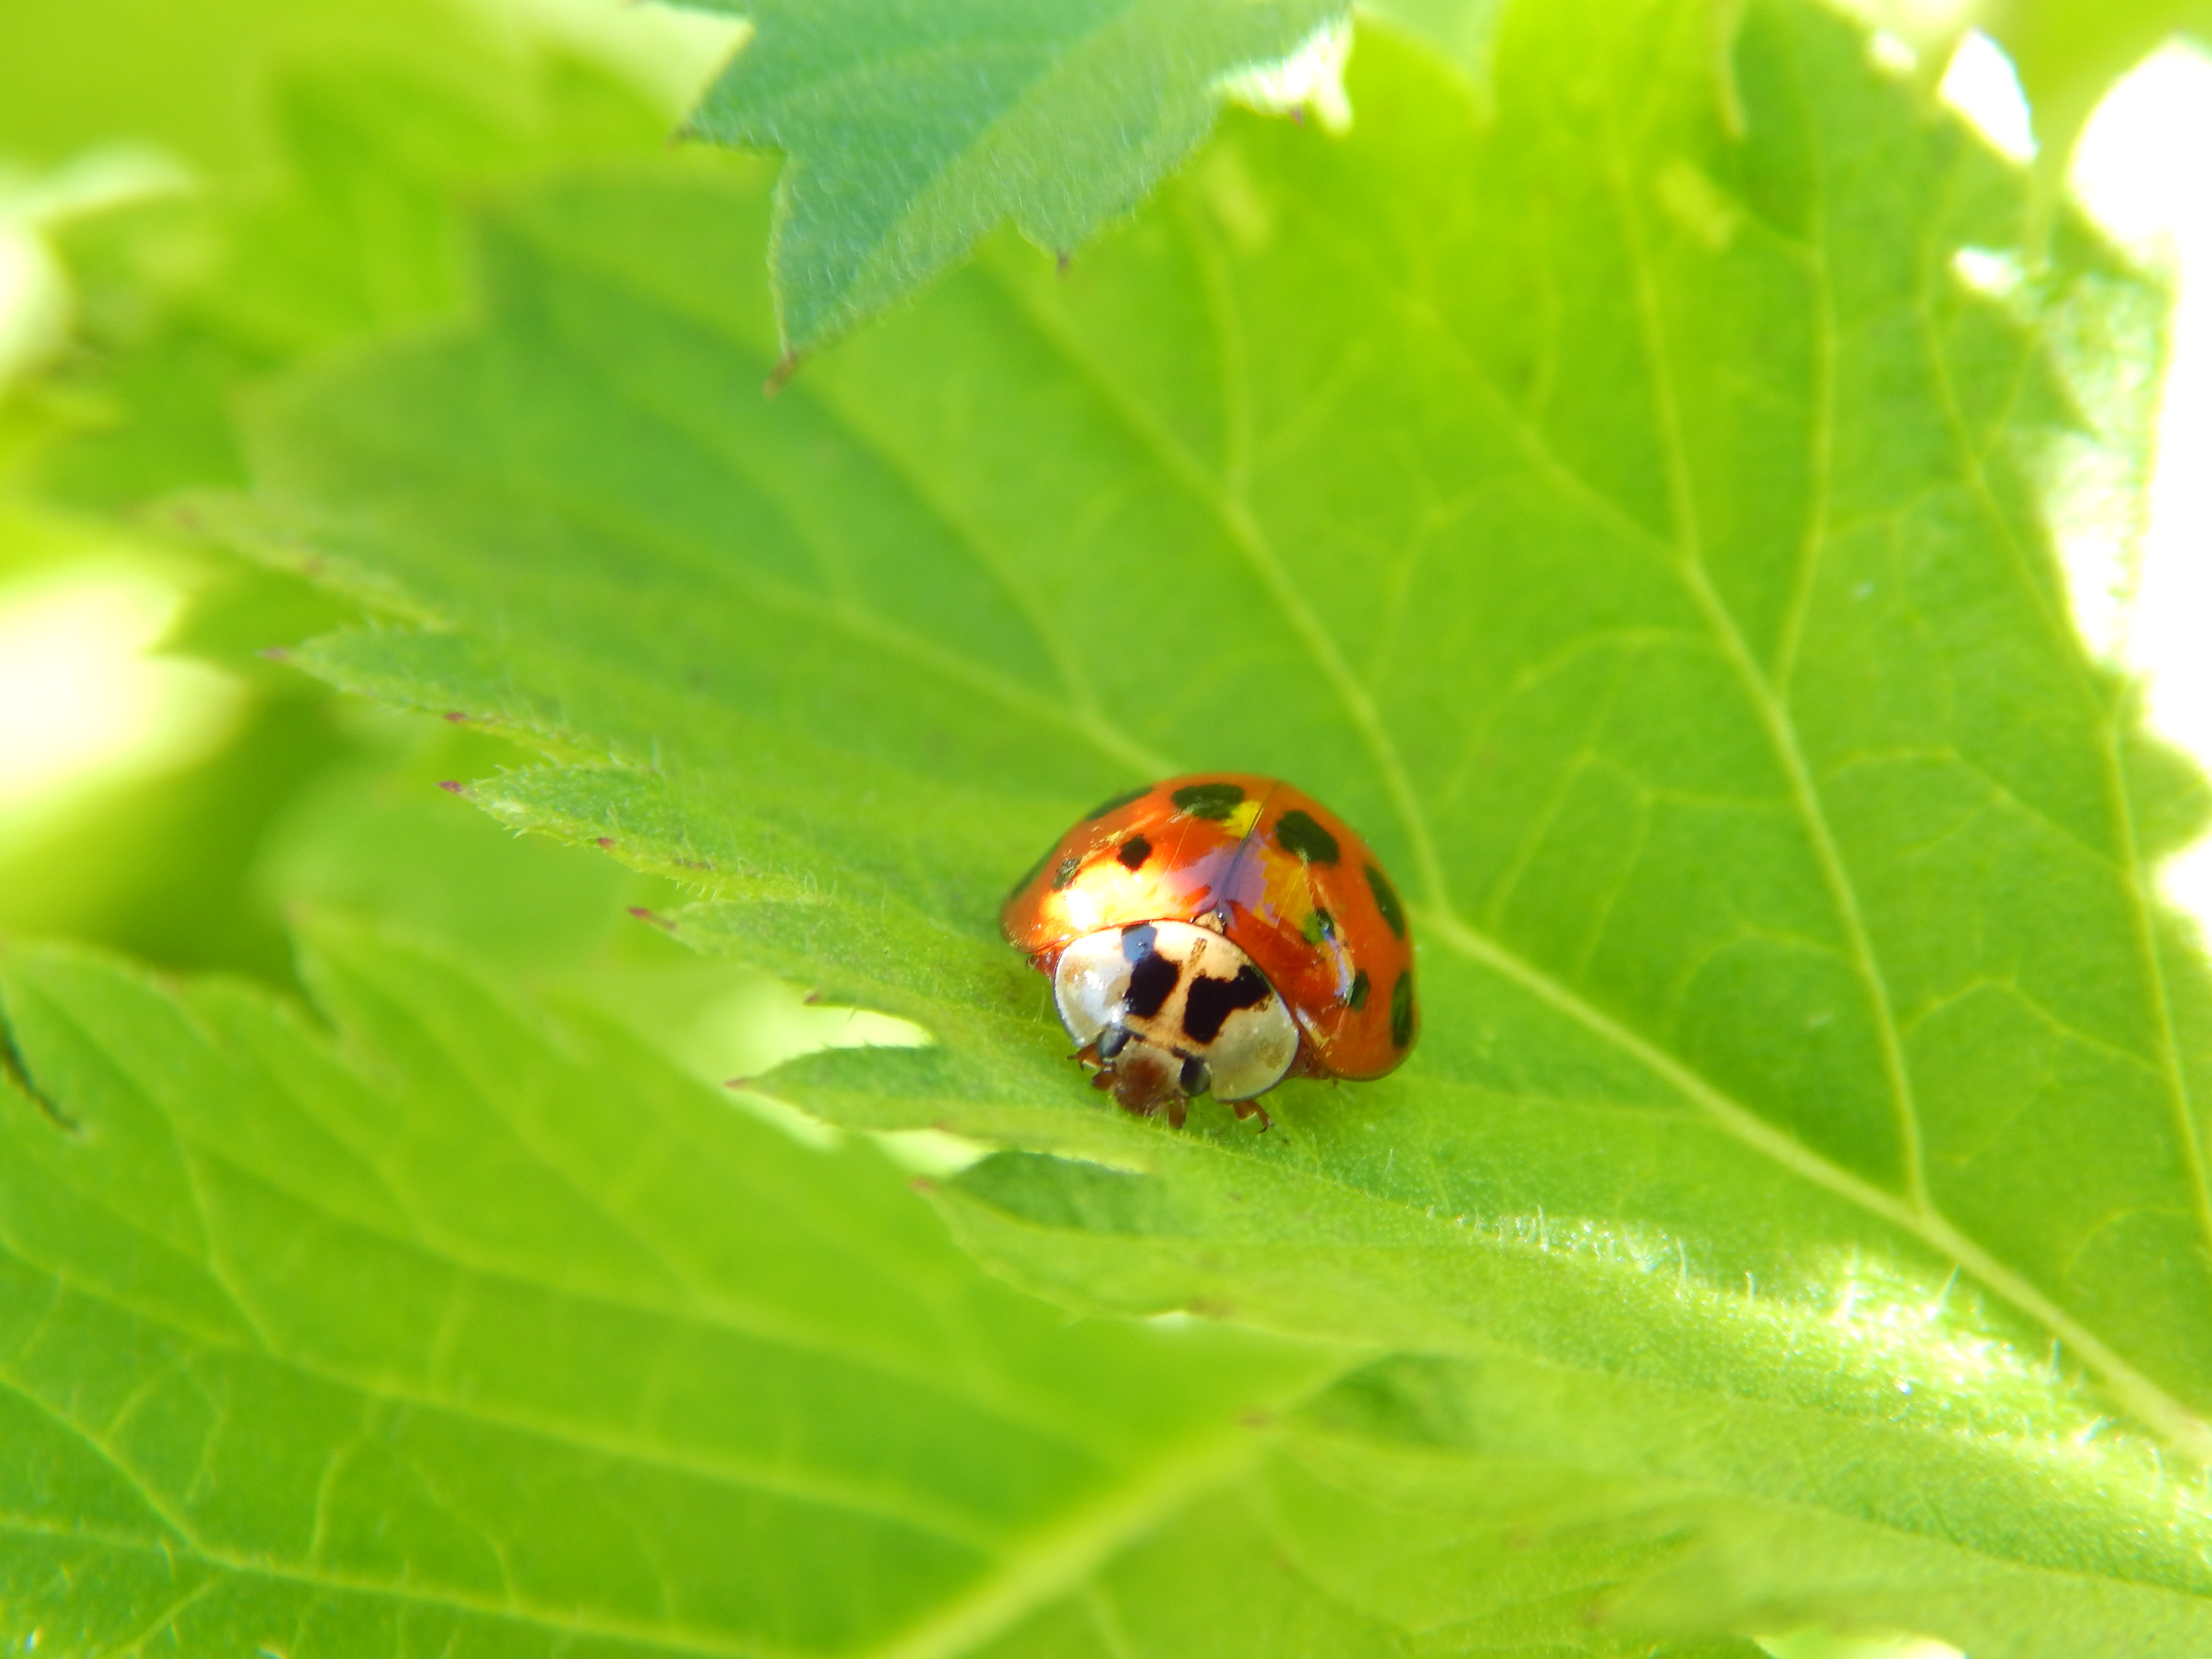 By Stephen Ments Off On Beautiful Ladybug HD Wallpaper